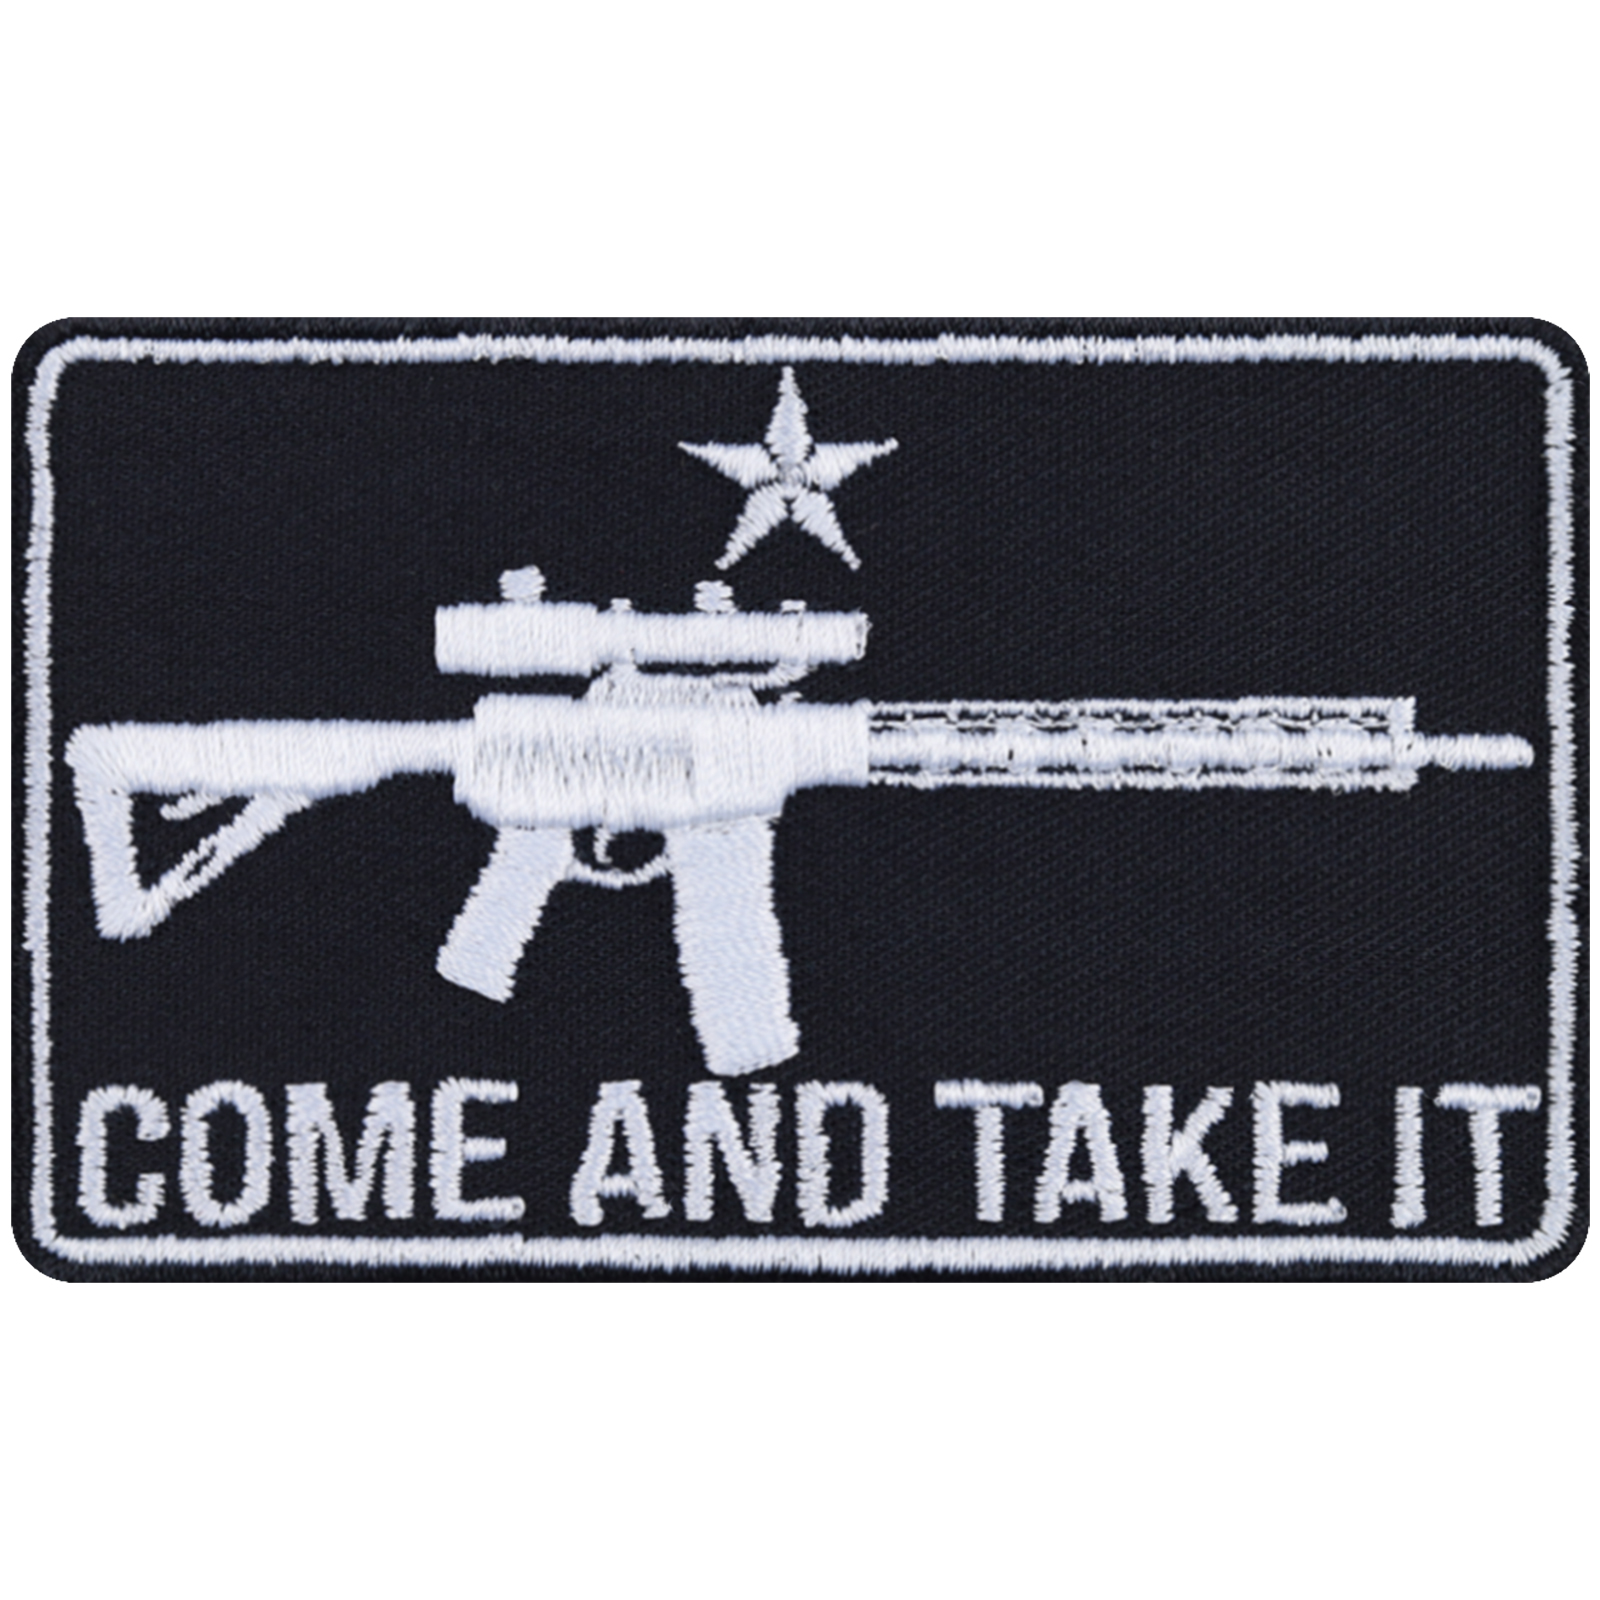 Come and take it - Patch